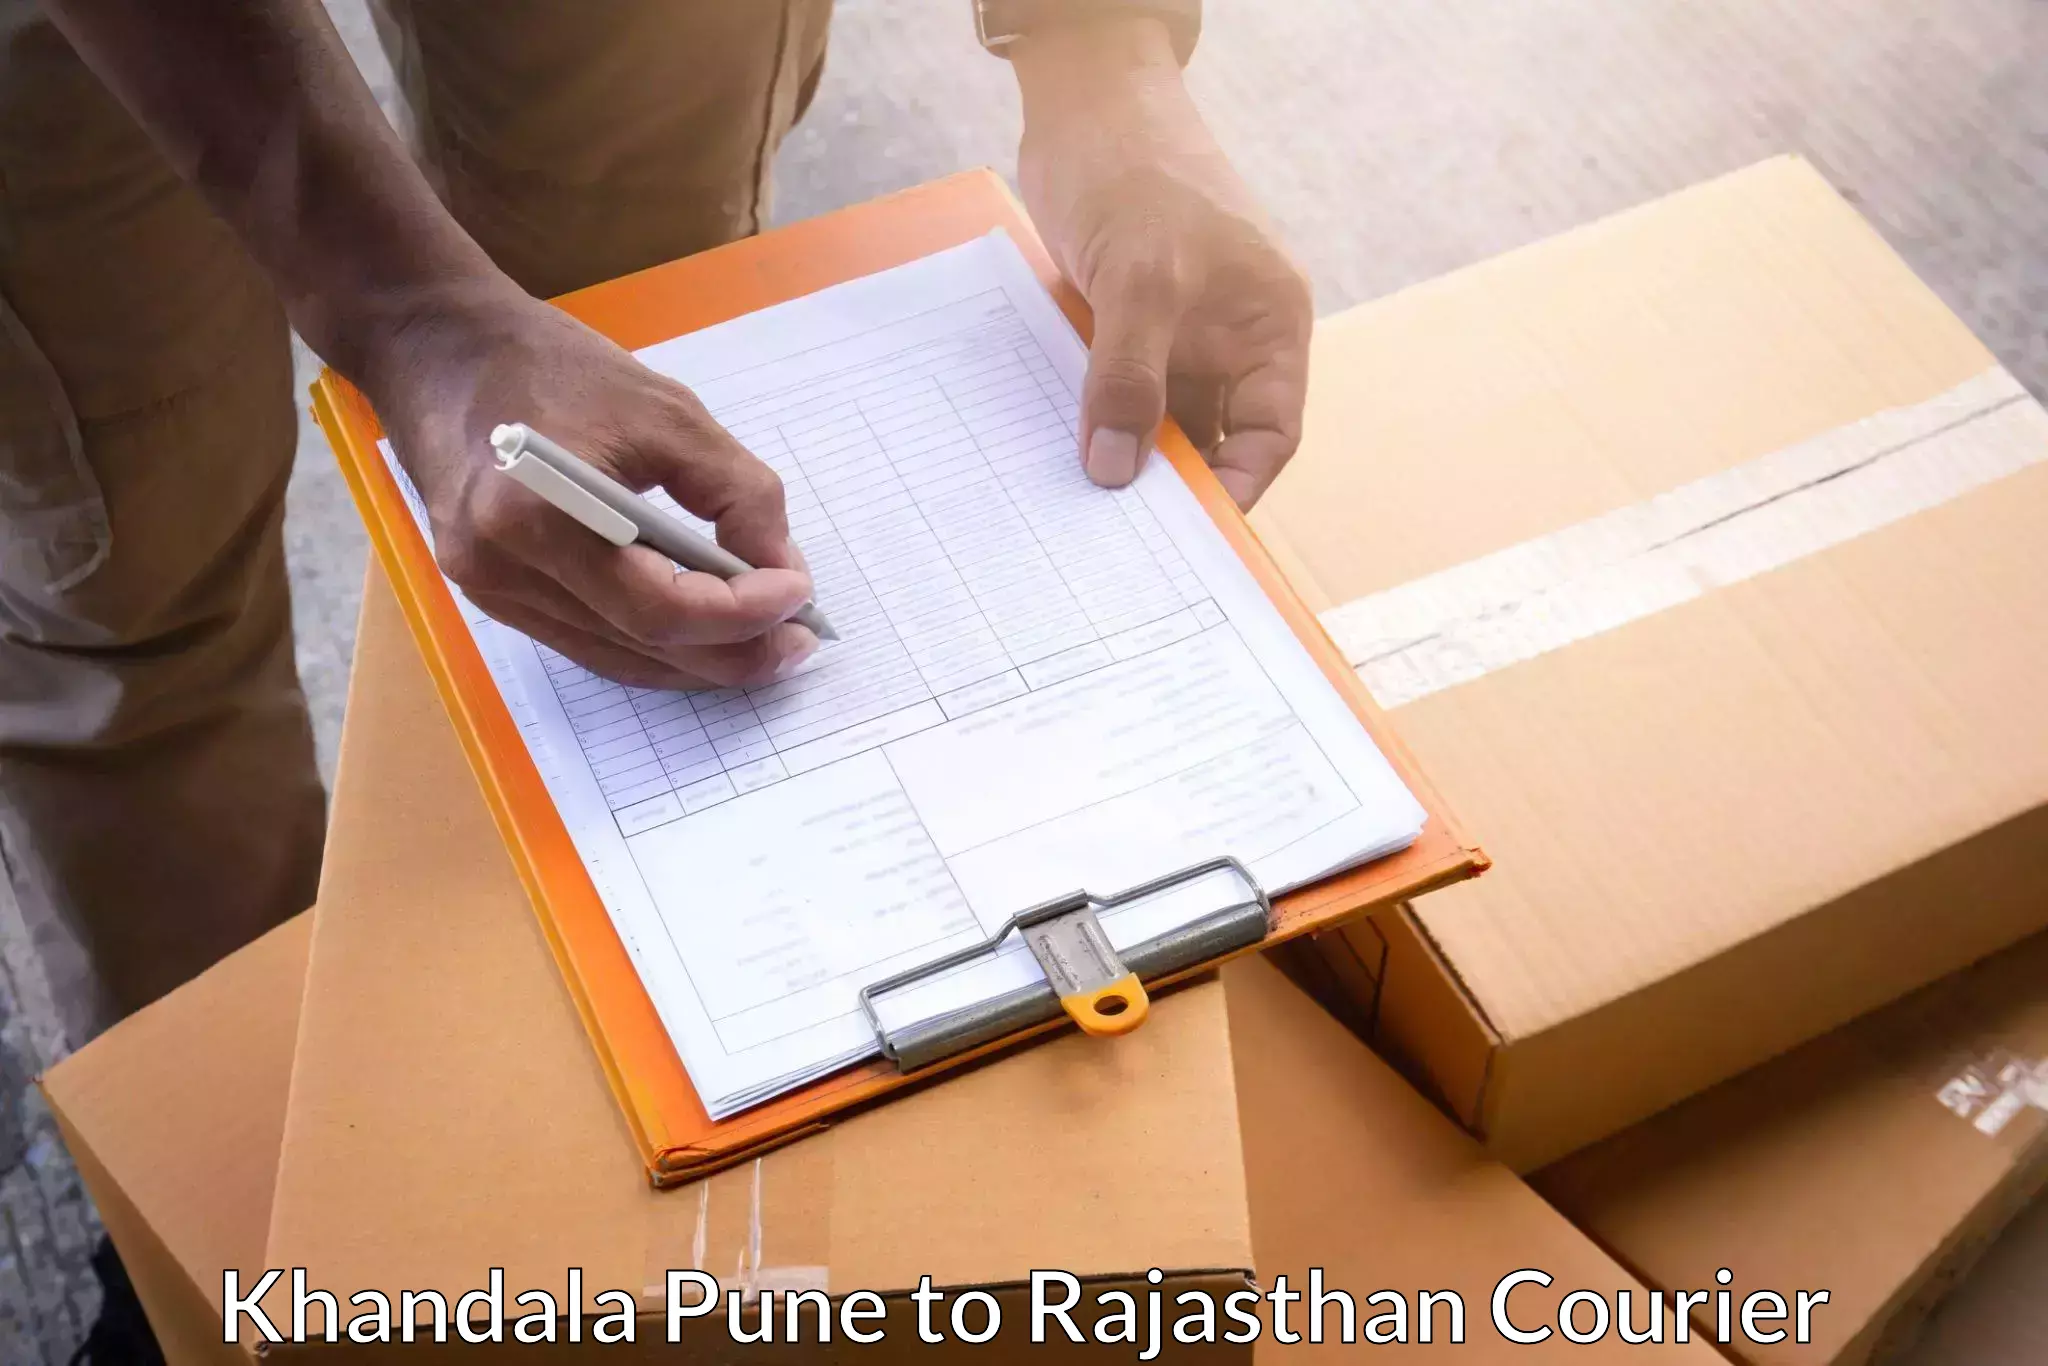 Advanced shipping services Khandala Pune to Yeswanthapur